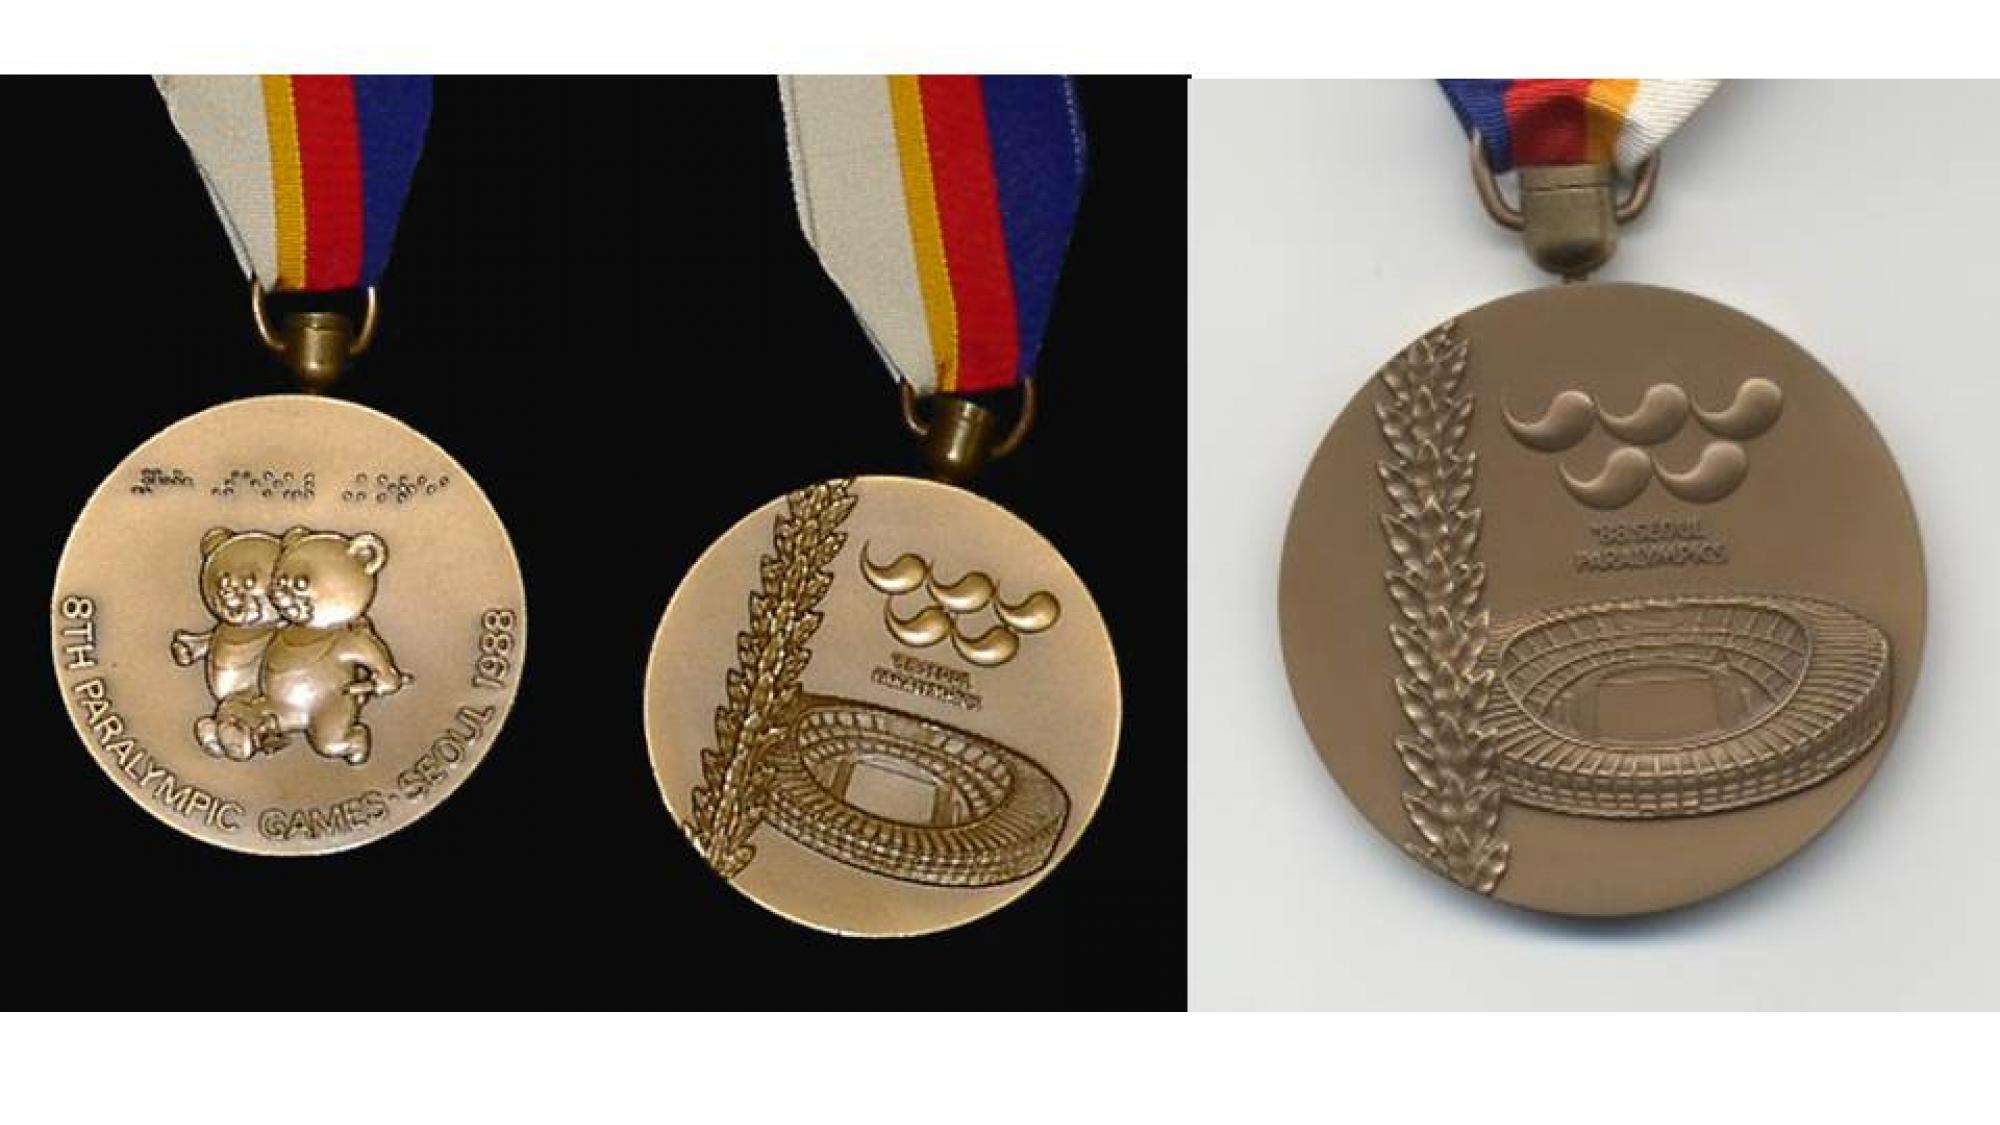 The medals of the Seoul 1988 Paralympic Games